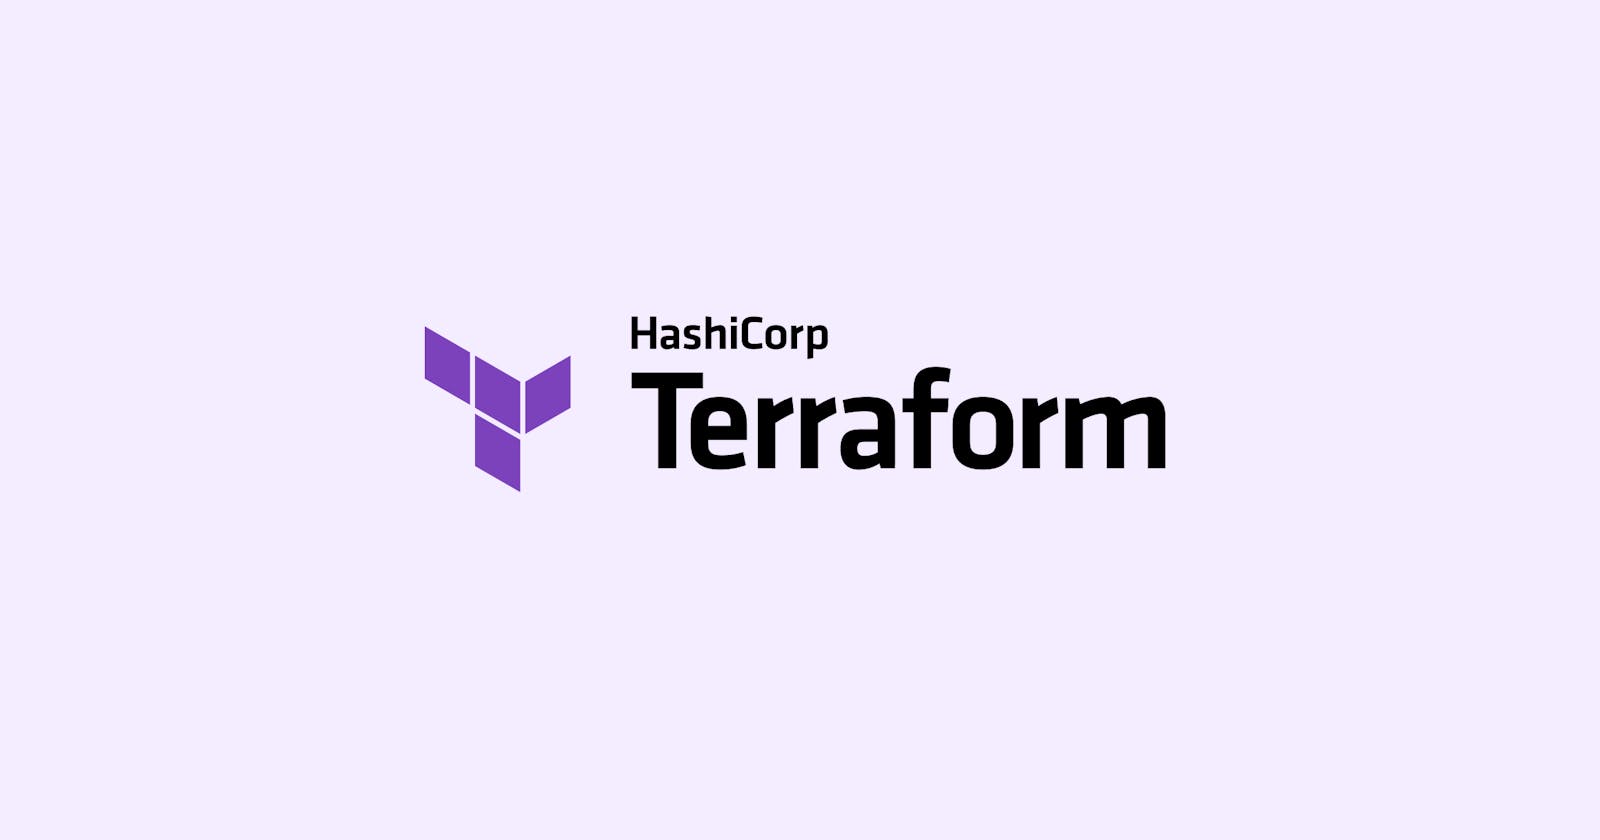 Getting started with Terraform and hosting a portfolio website